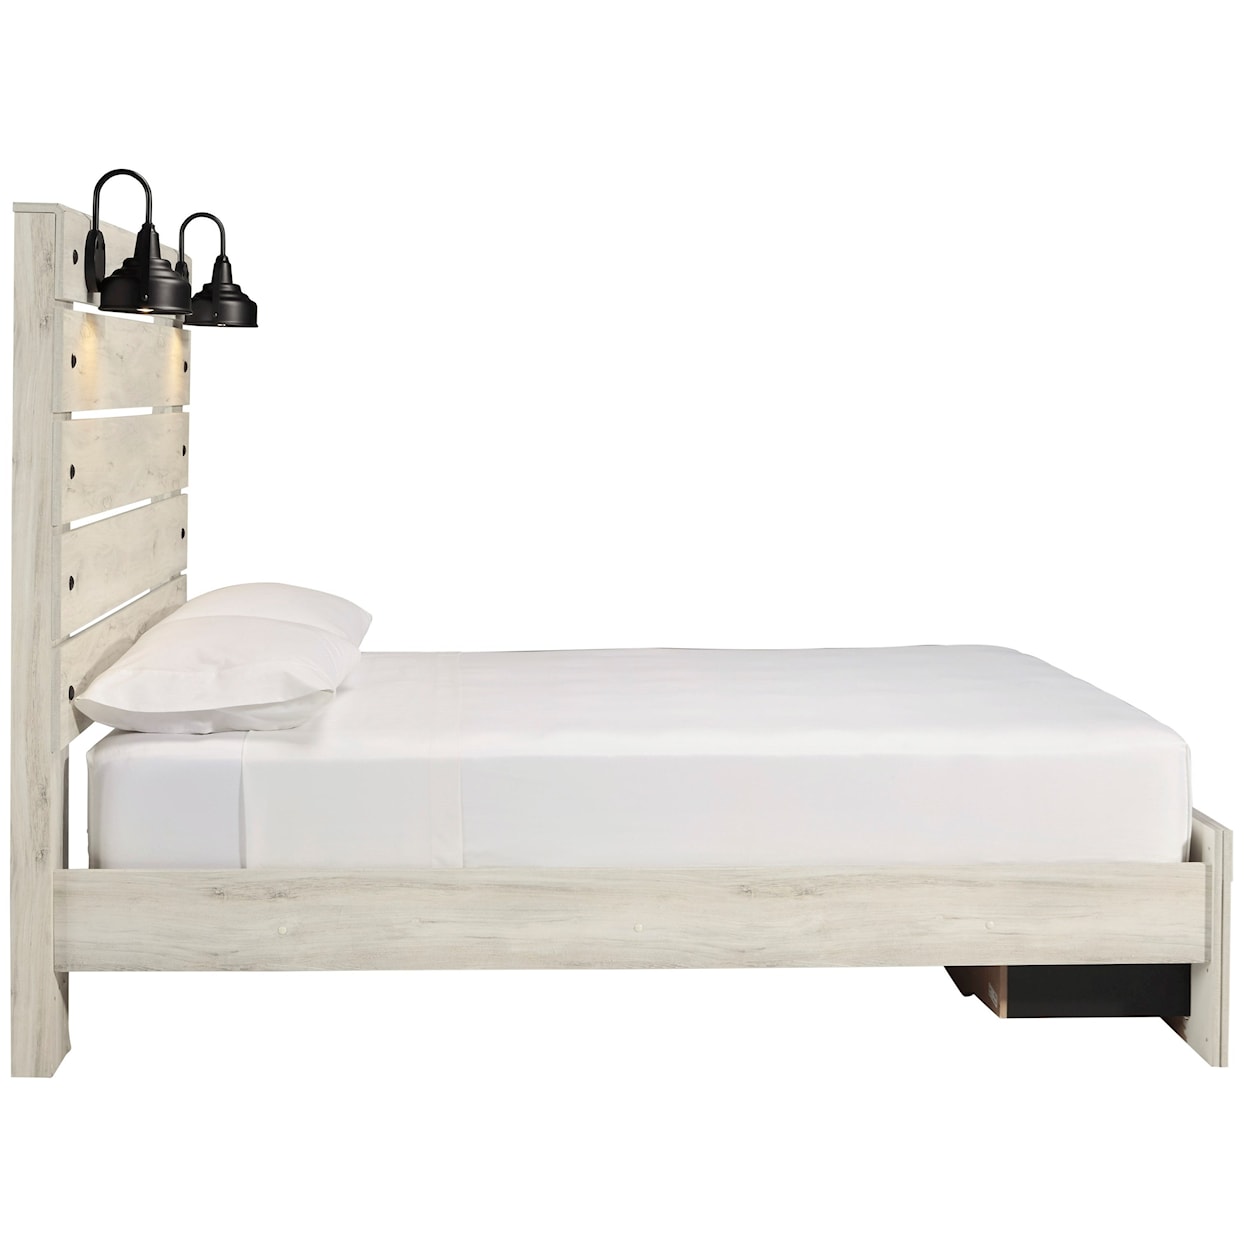 Ashley Furniture Signature Design Cambeck Queen Bed w/ Lights & Footboard Drawers